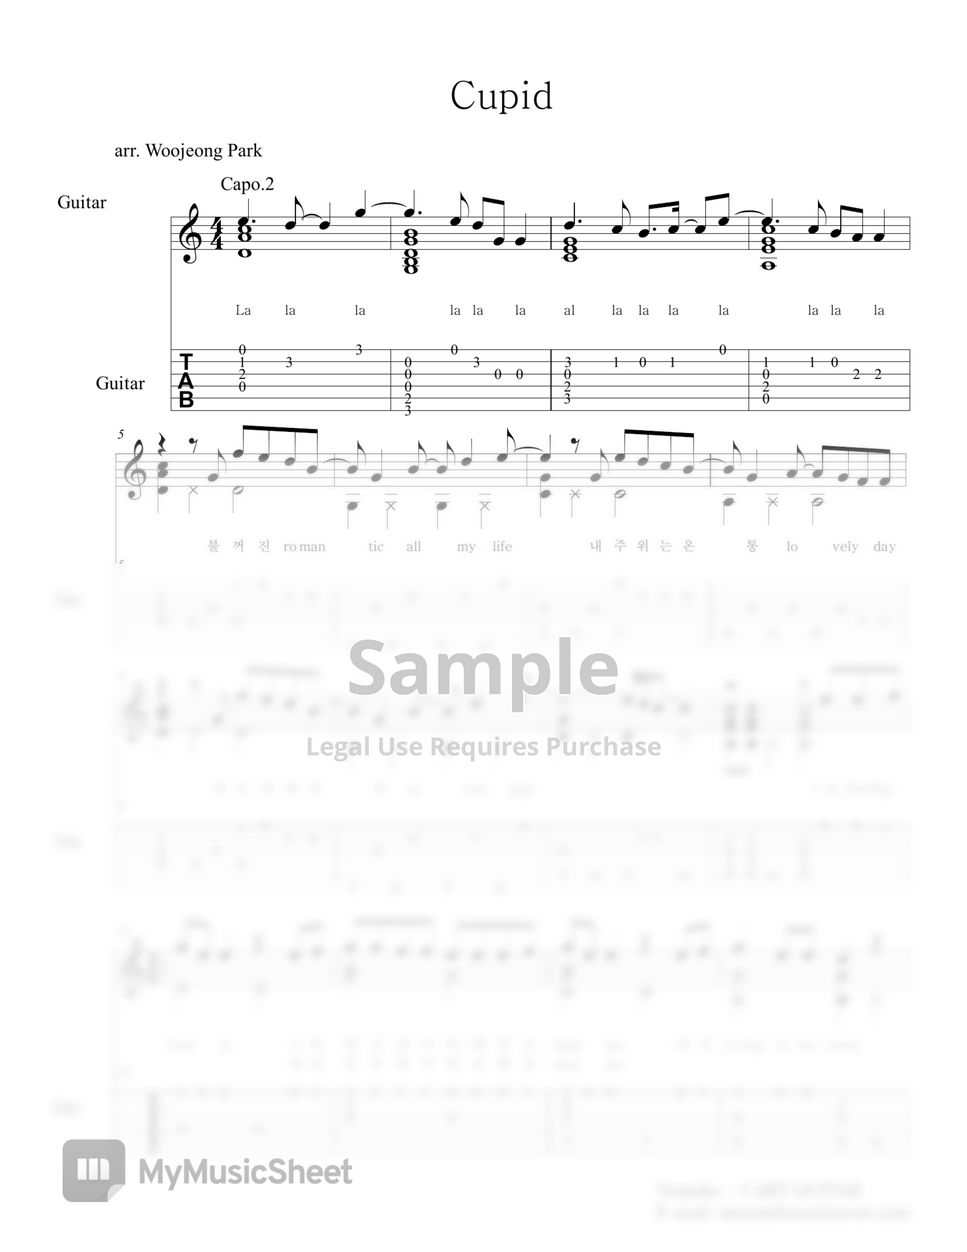 FIFTY FIFTY - Cupid (GUITAR TAB) by Woojeong Park